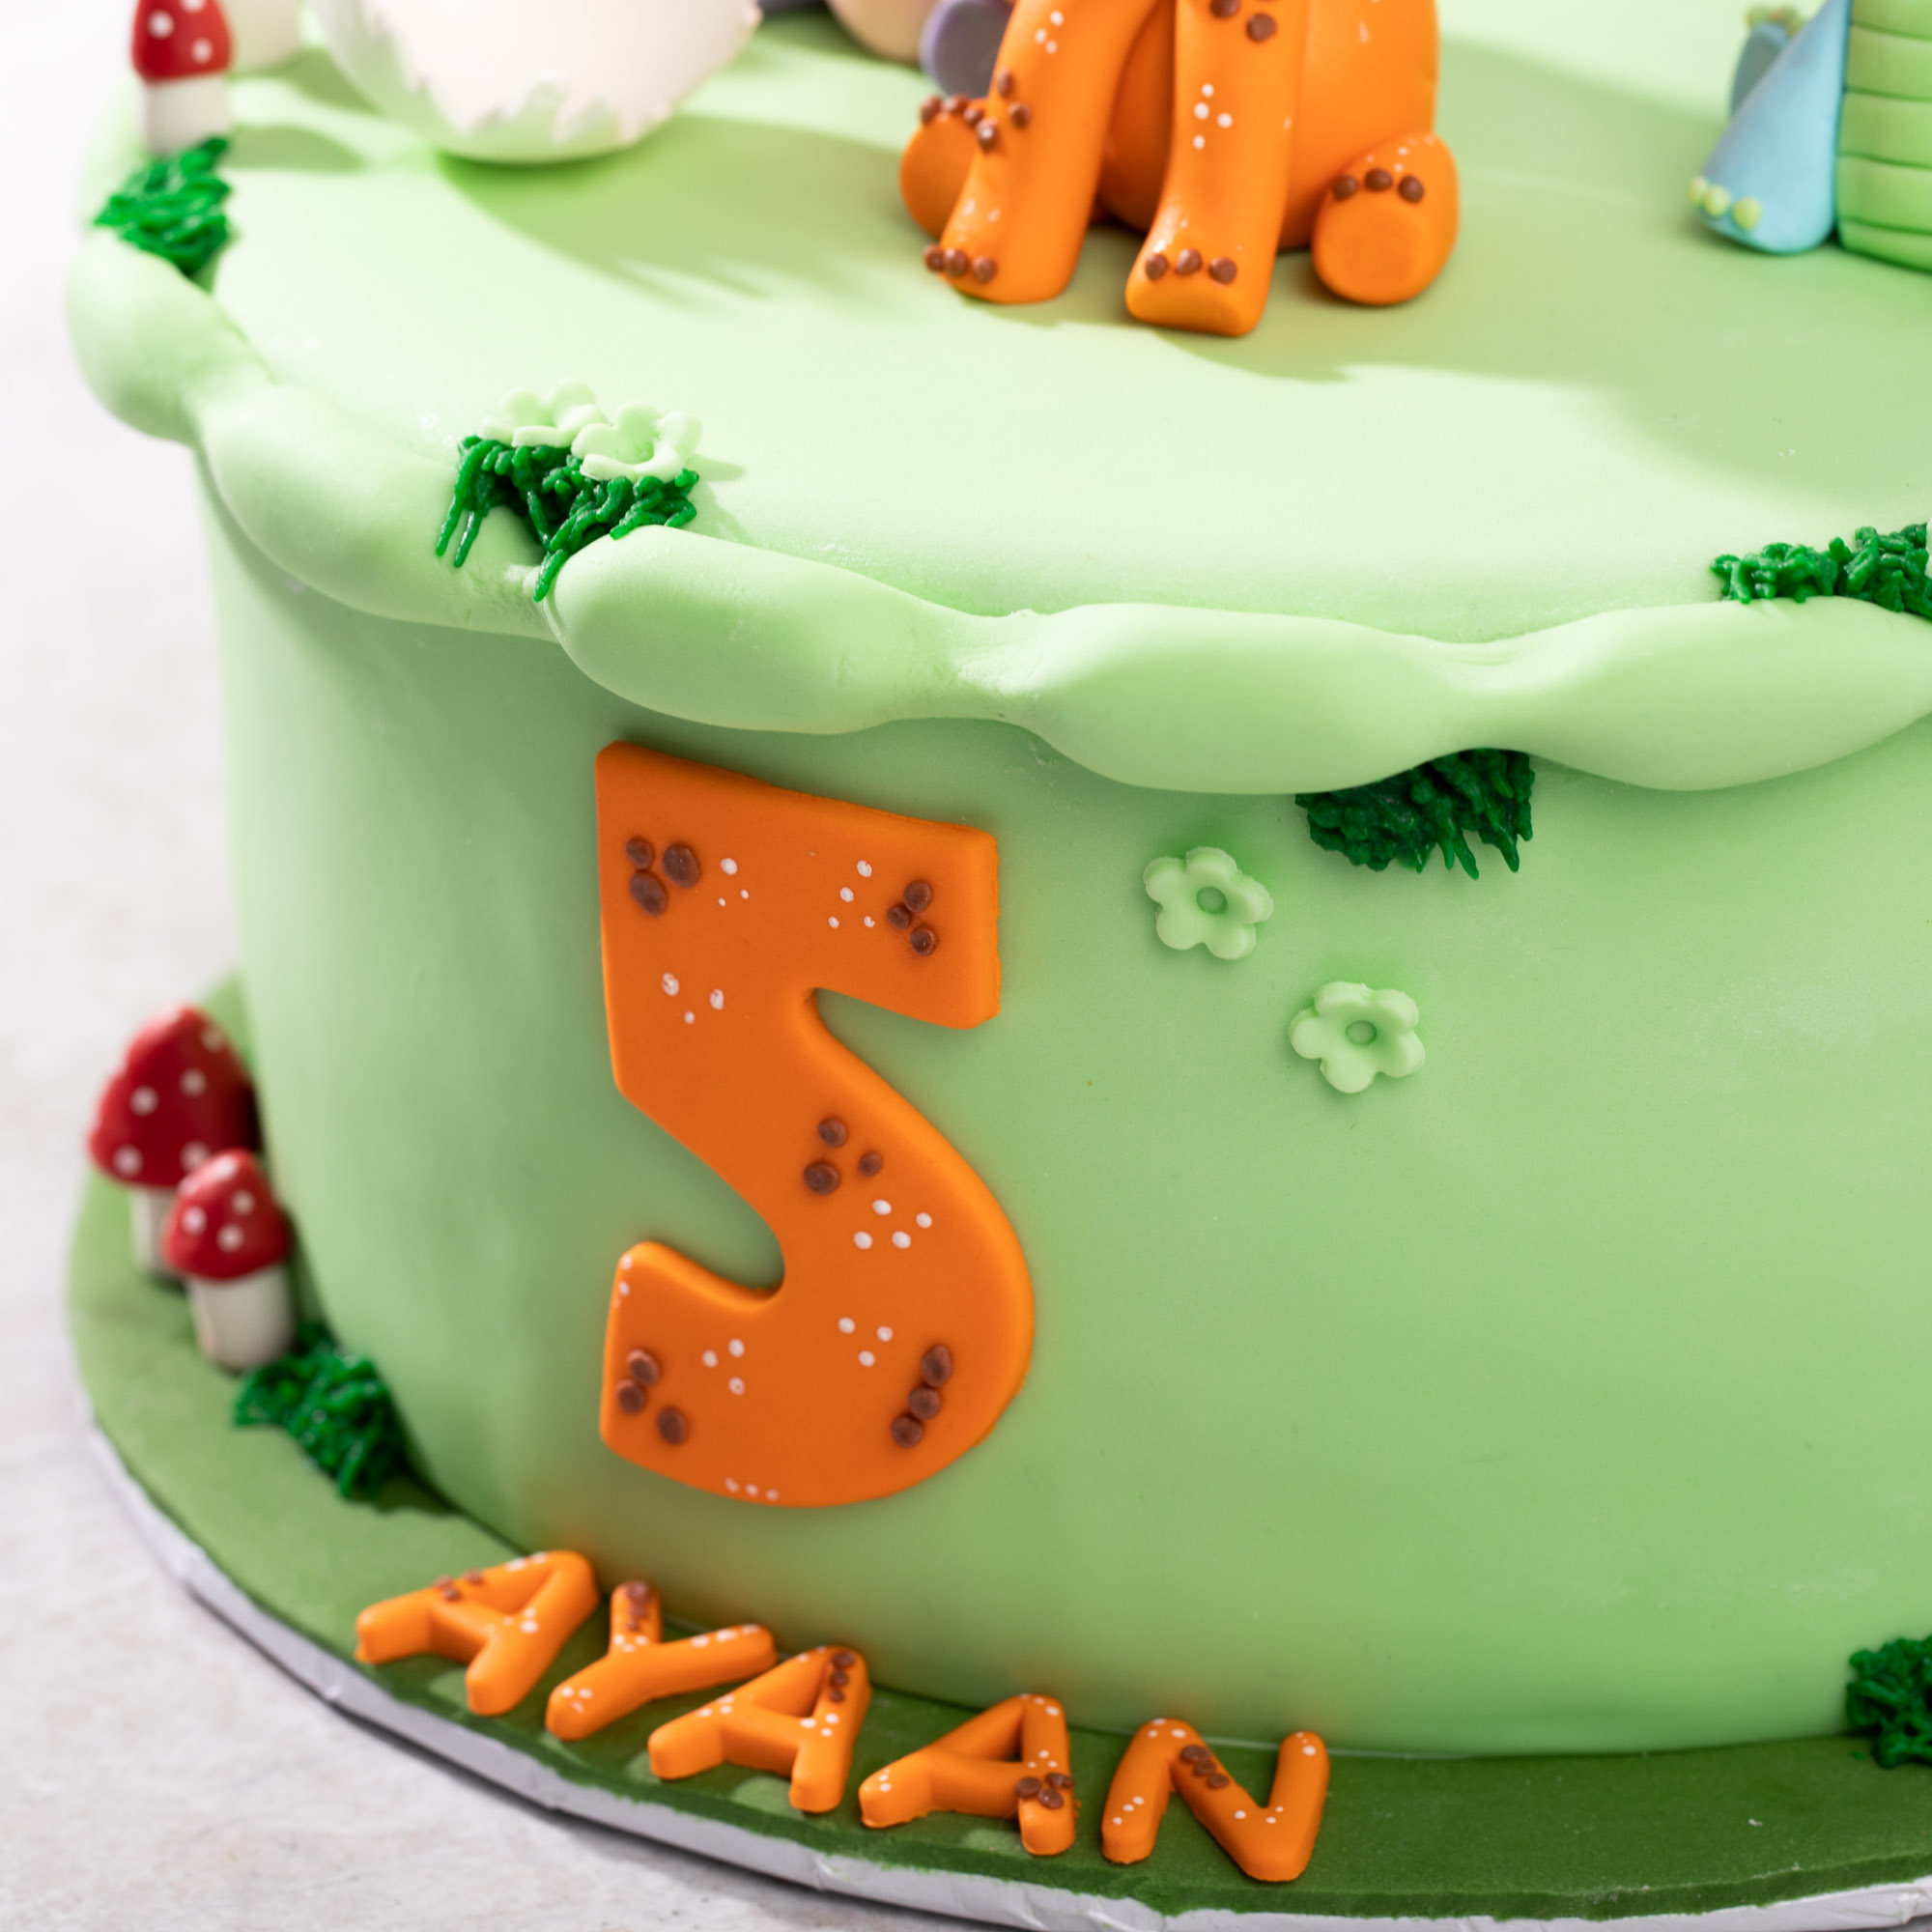 3D Pappa Pig Theme Cakes for Kids - Deliciae Cakes